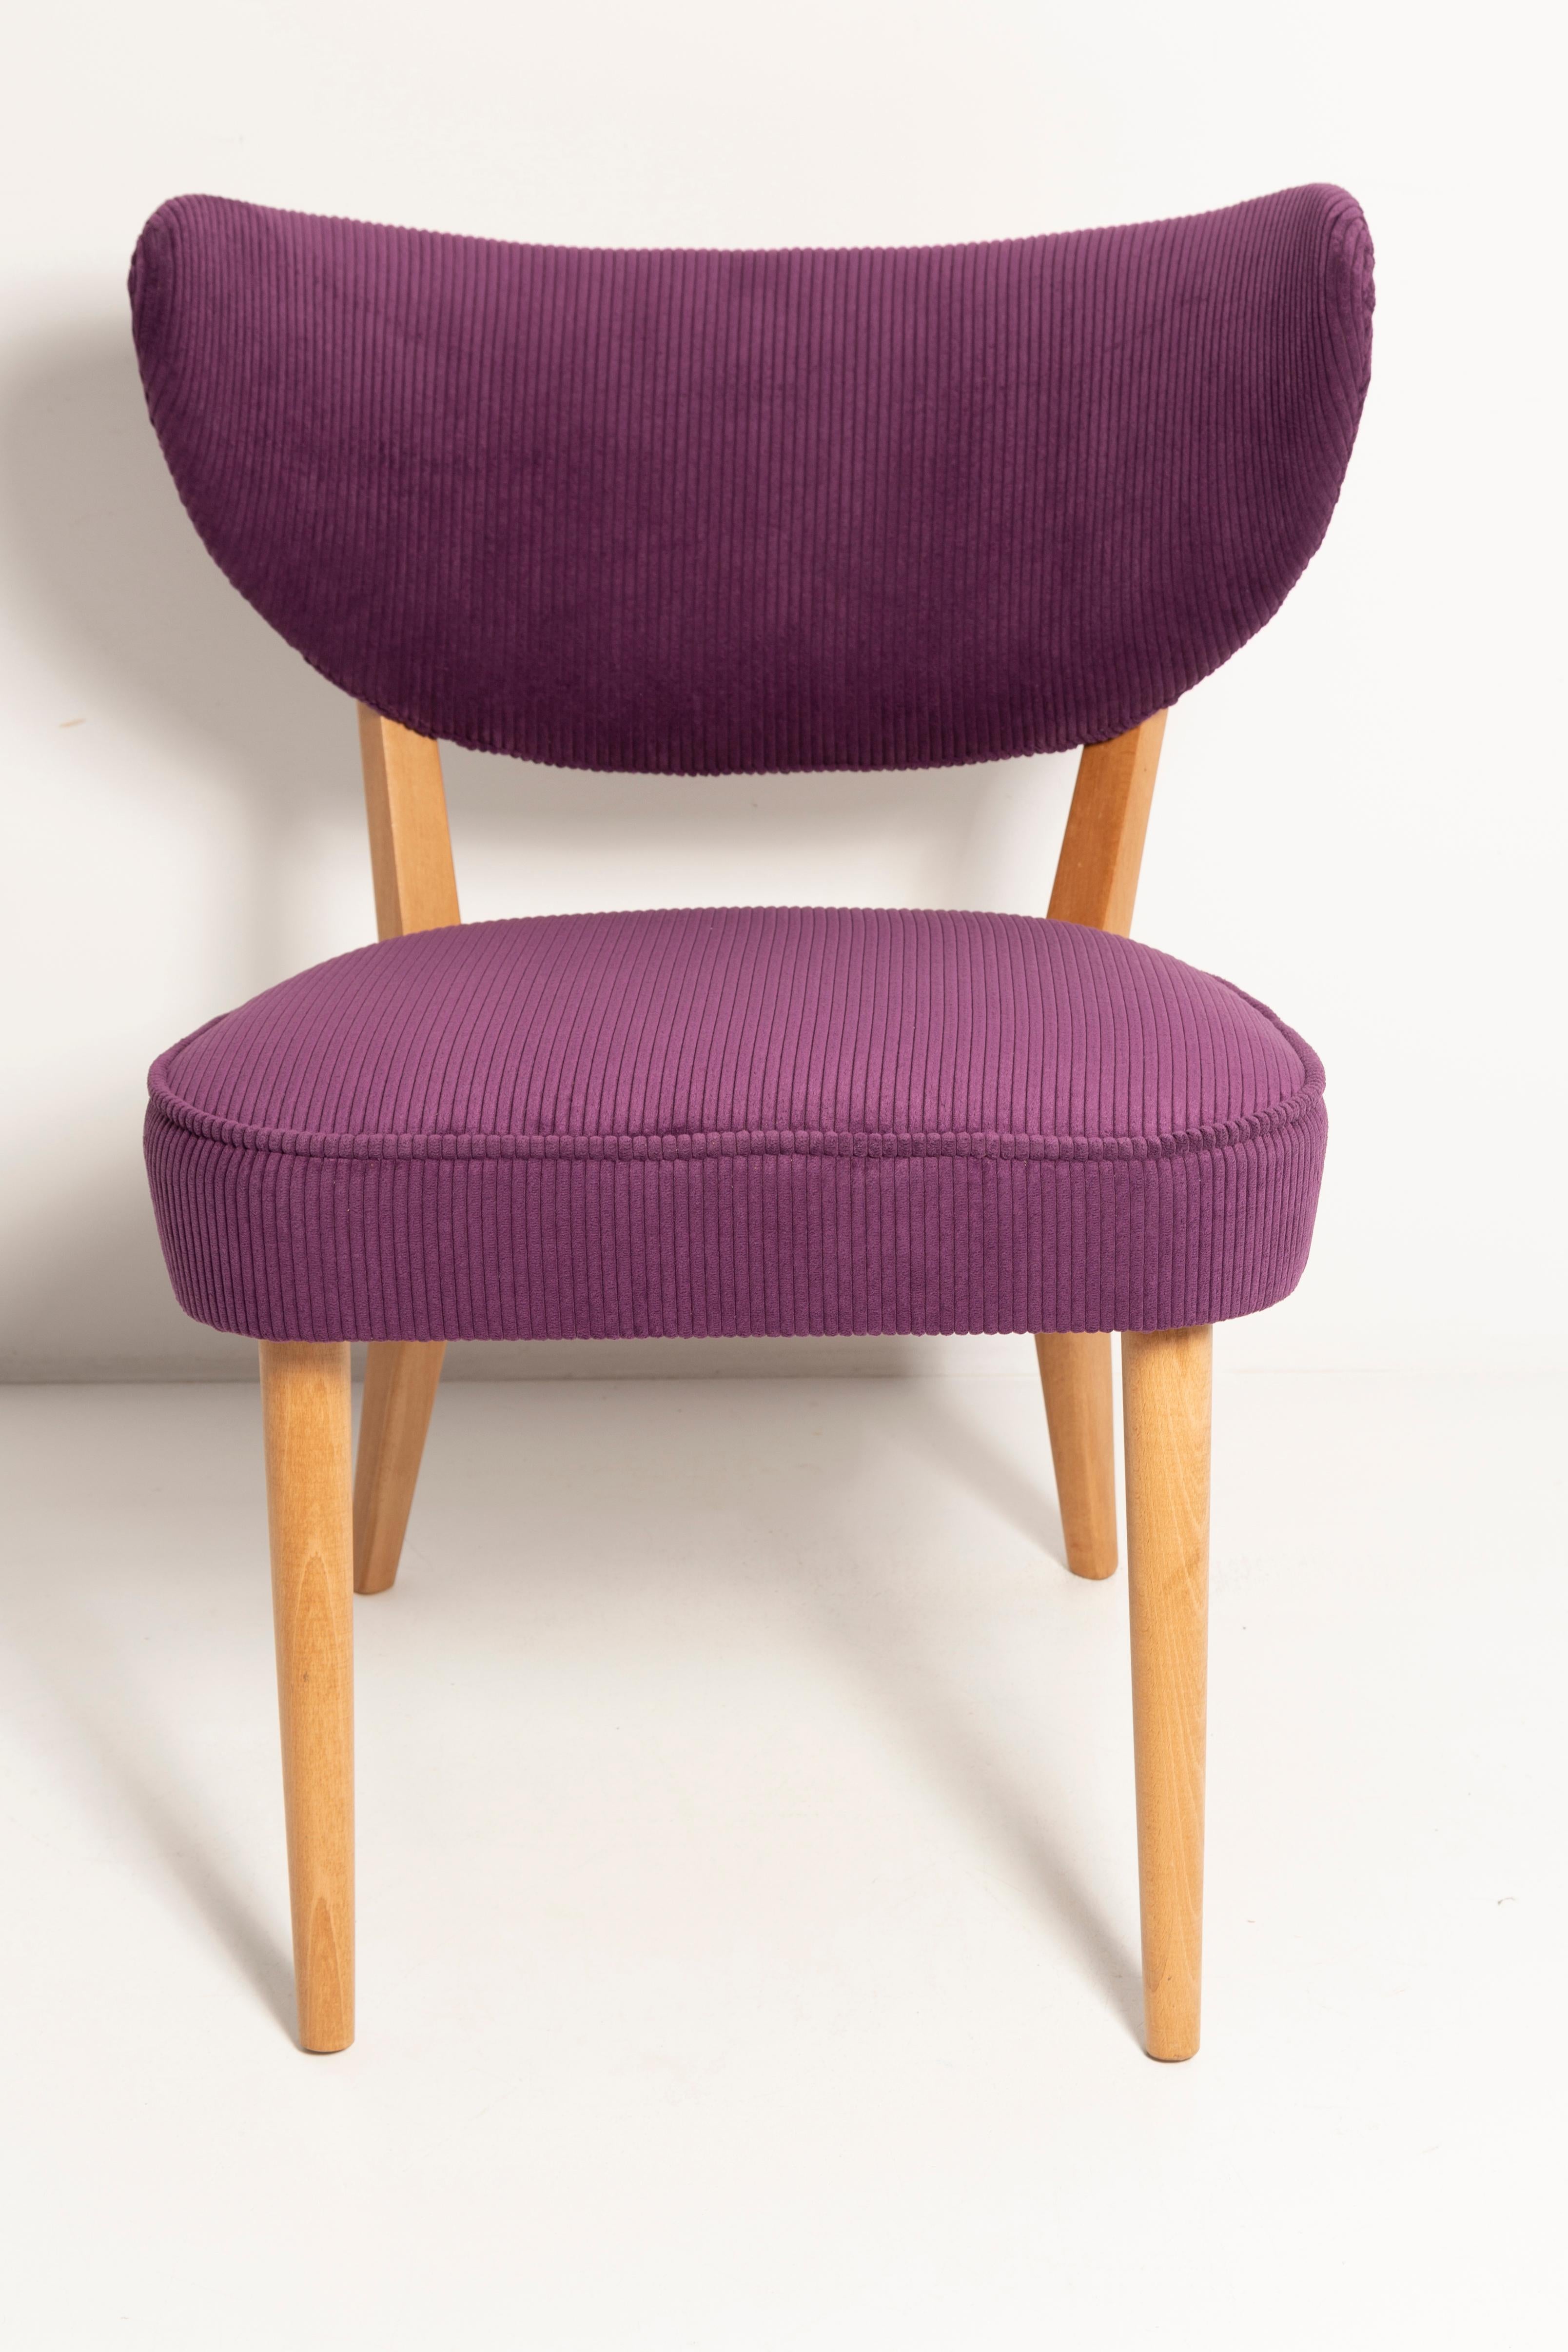 Midcentury Style Violet Velvet Club Chair, by Vintola Studio, Europe, Poland For Sale 5